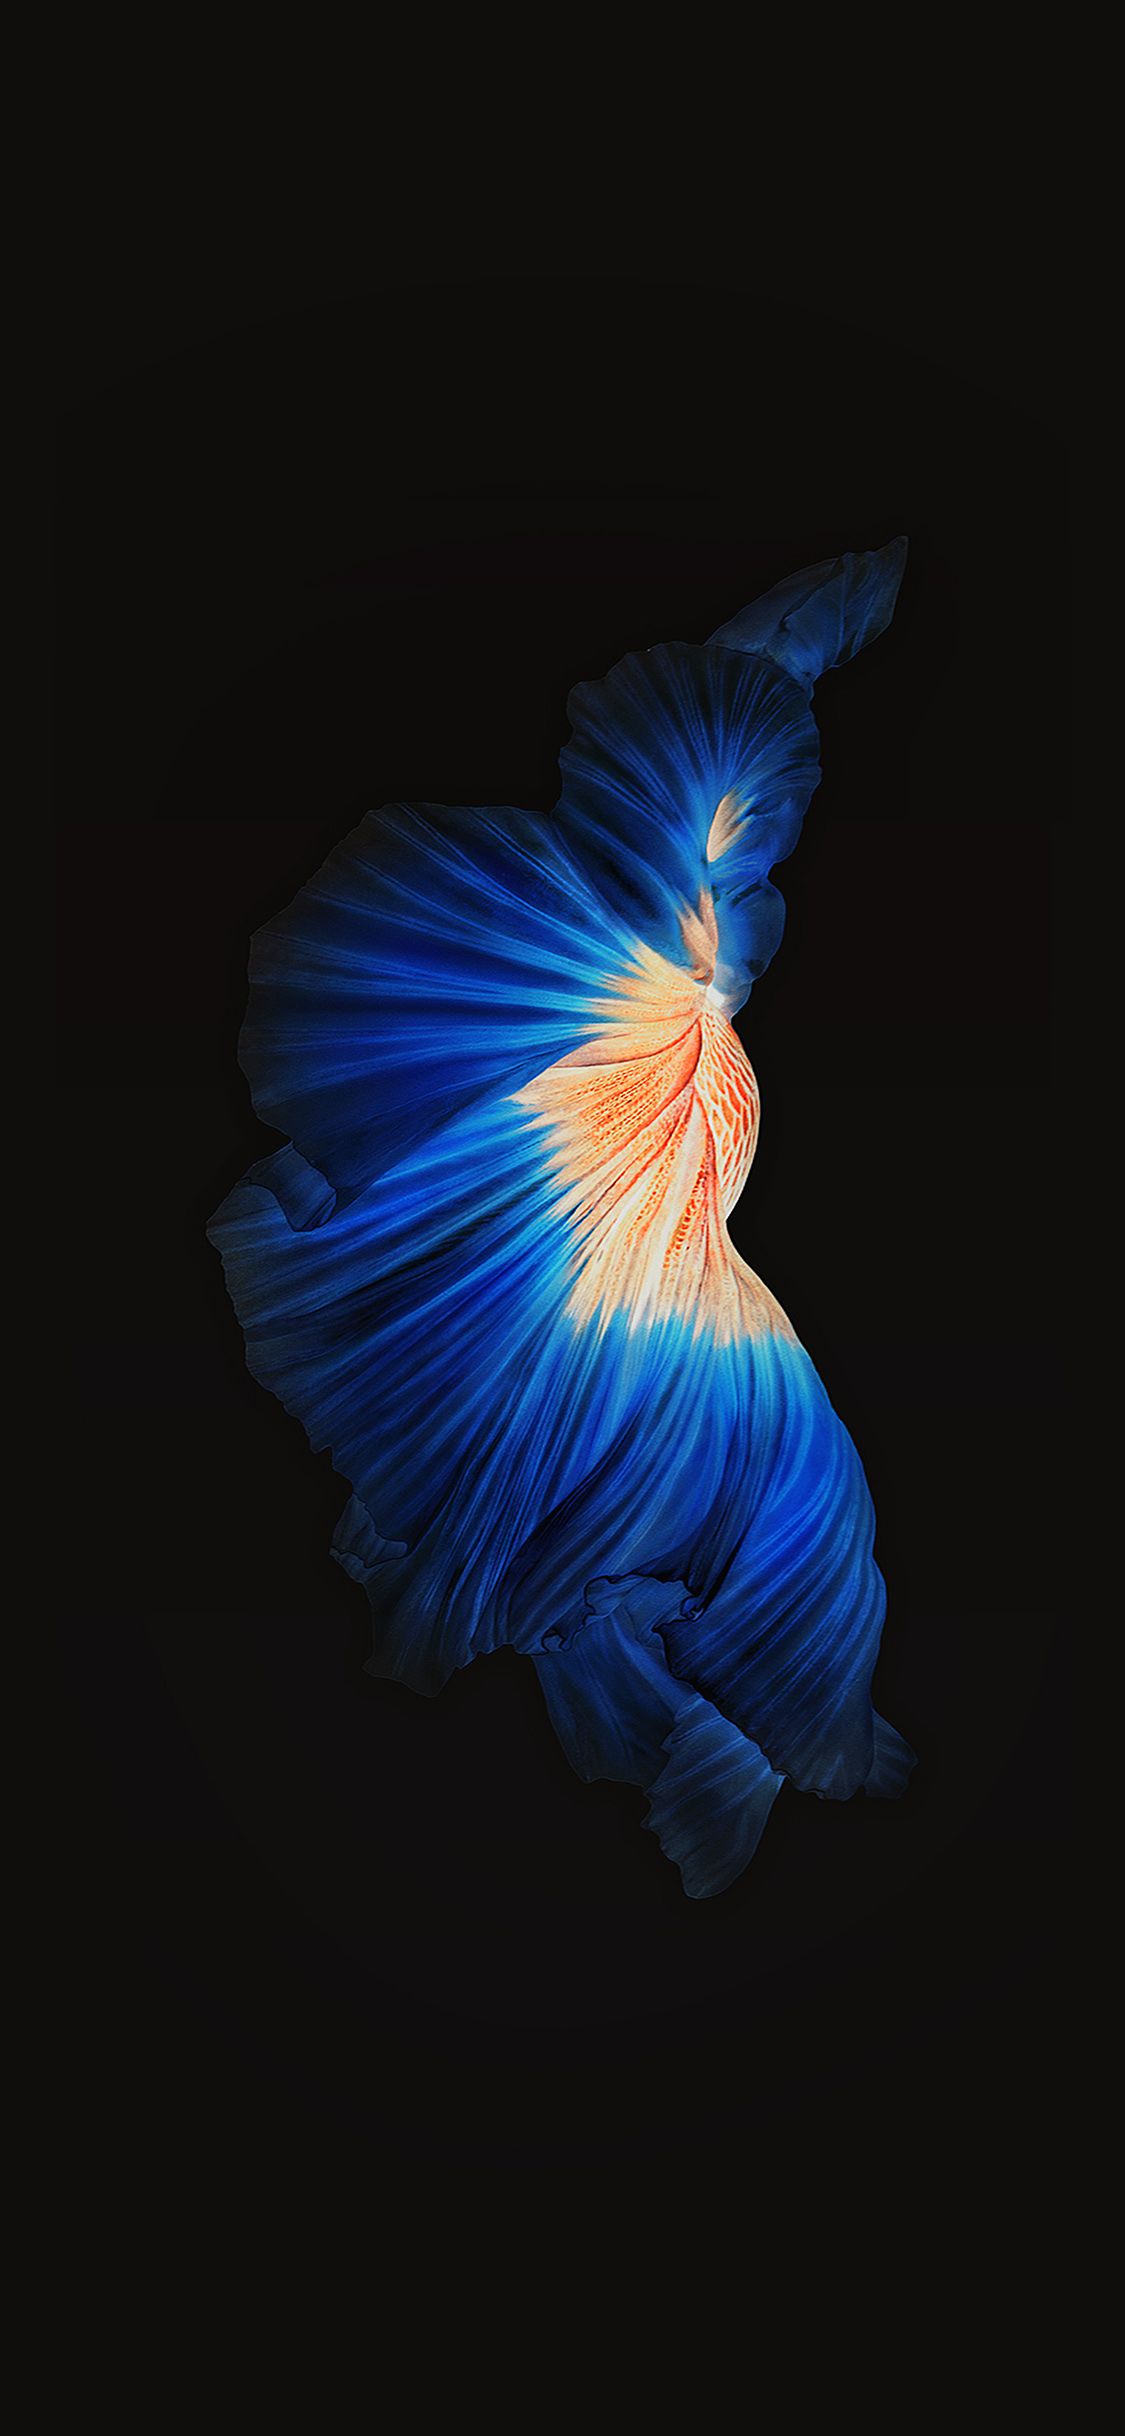 Apple iPhone XR Wallpapers on WallpaperDog